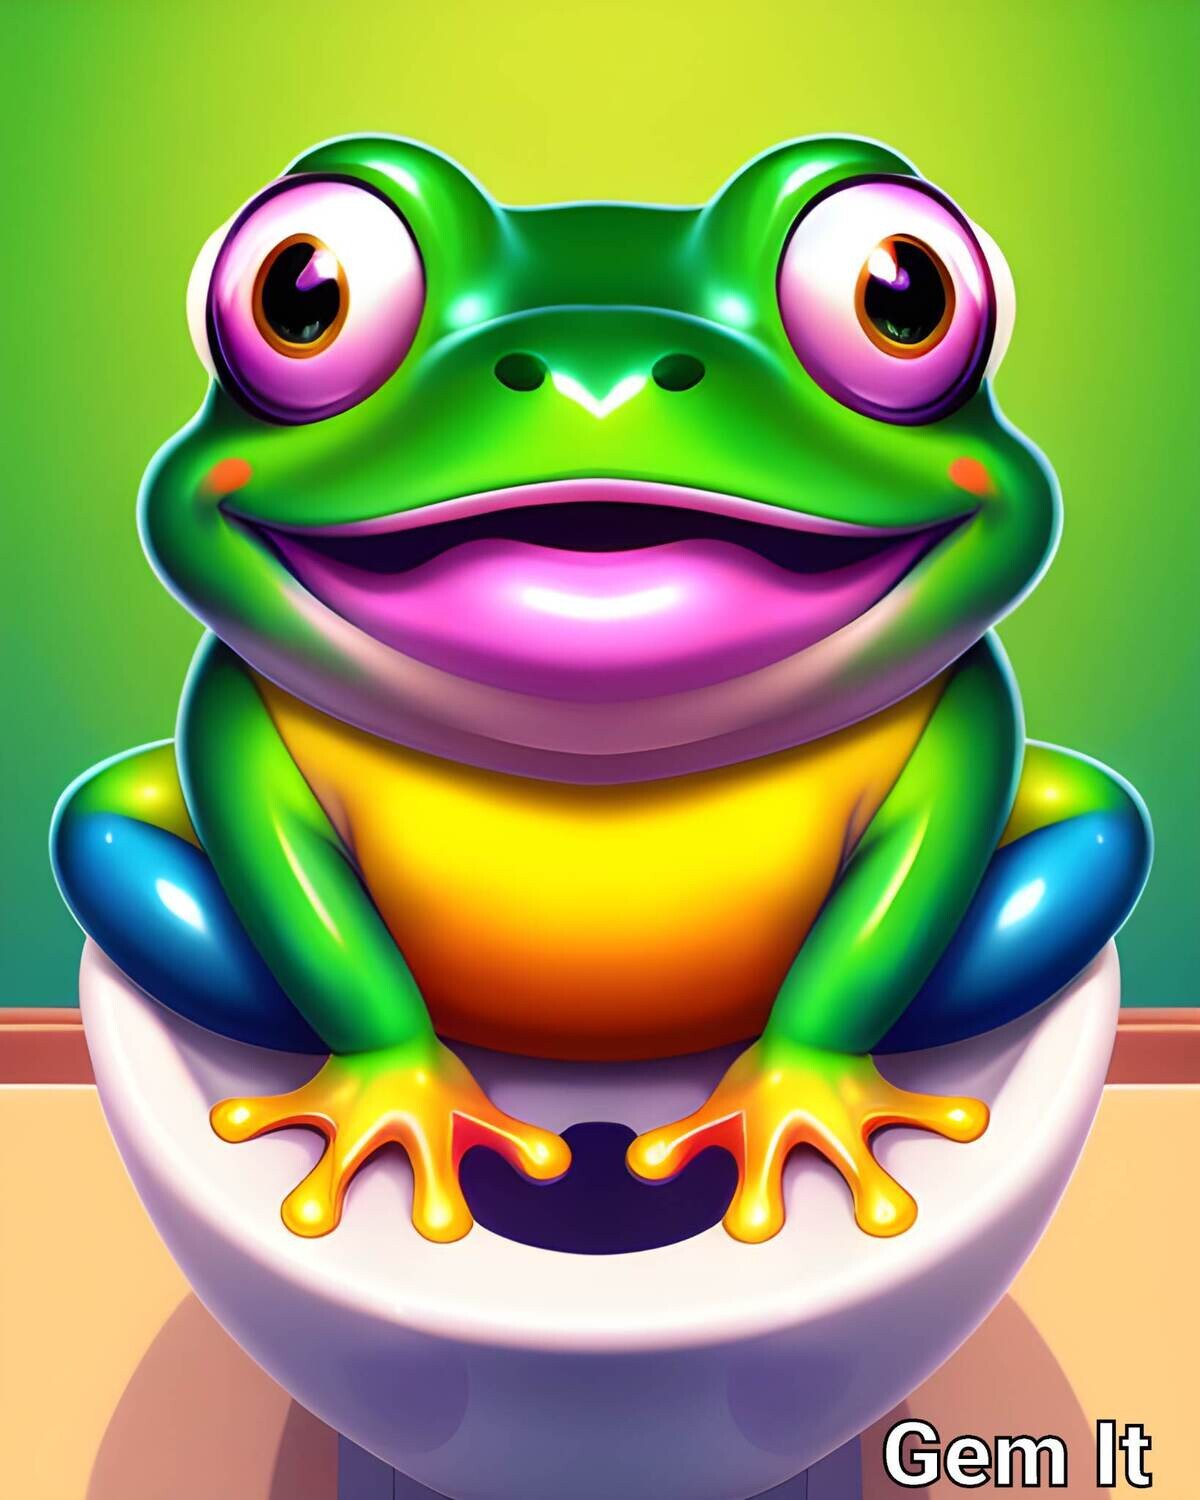 Frog on a Toilet 1 - Specially ordered for you. Delivery is approximately 4 - 6 weeks.